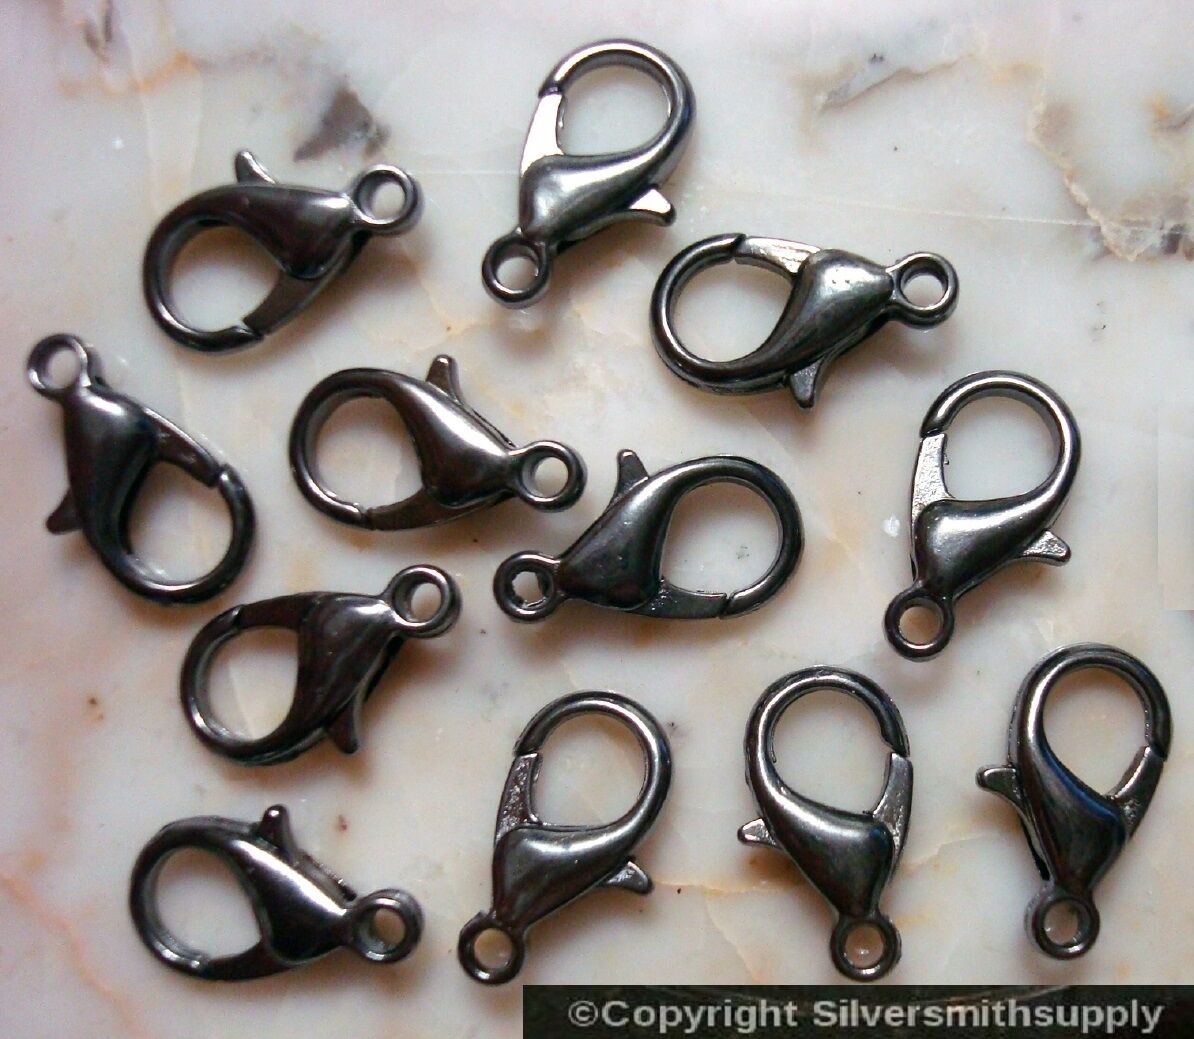 12 Gunmetal black plated steel necklace lobster claw jewelry clasps 14mm FPC341 Silversmithsupply